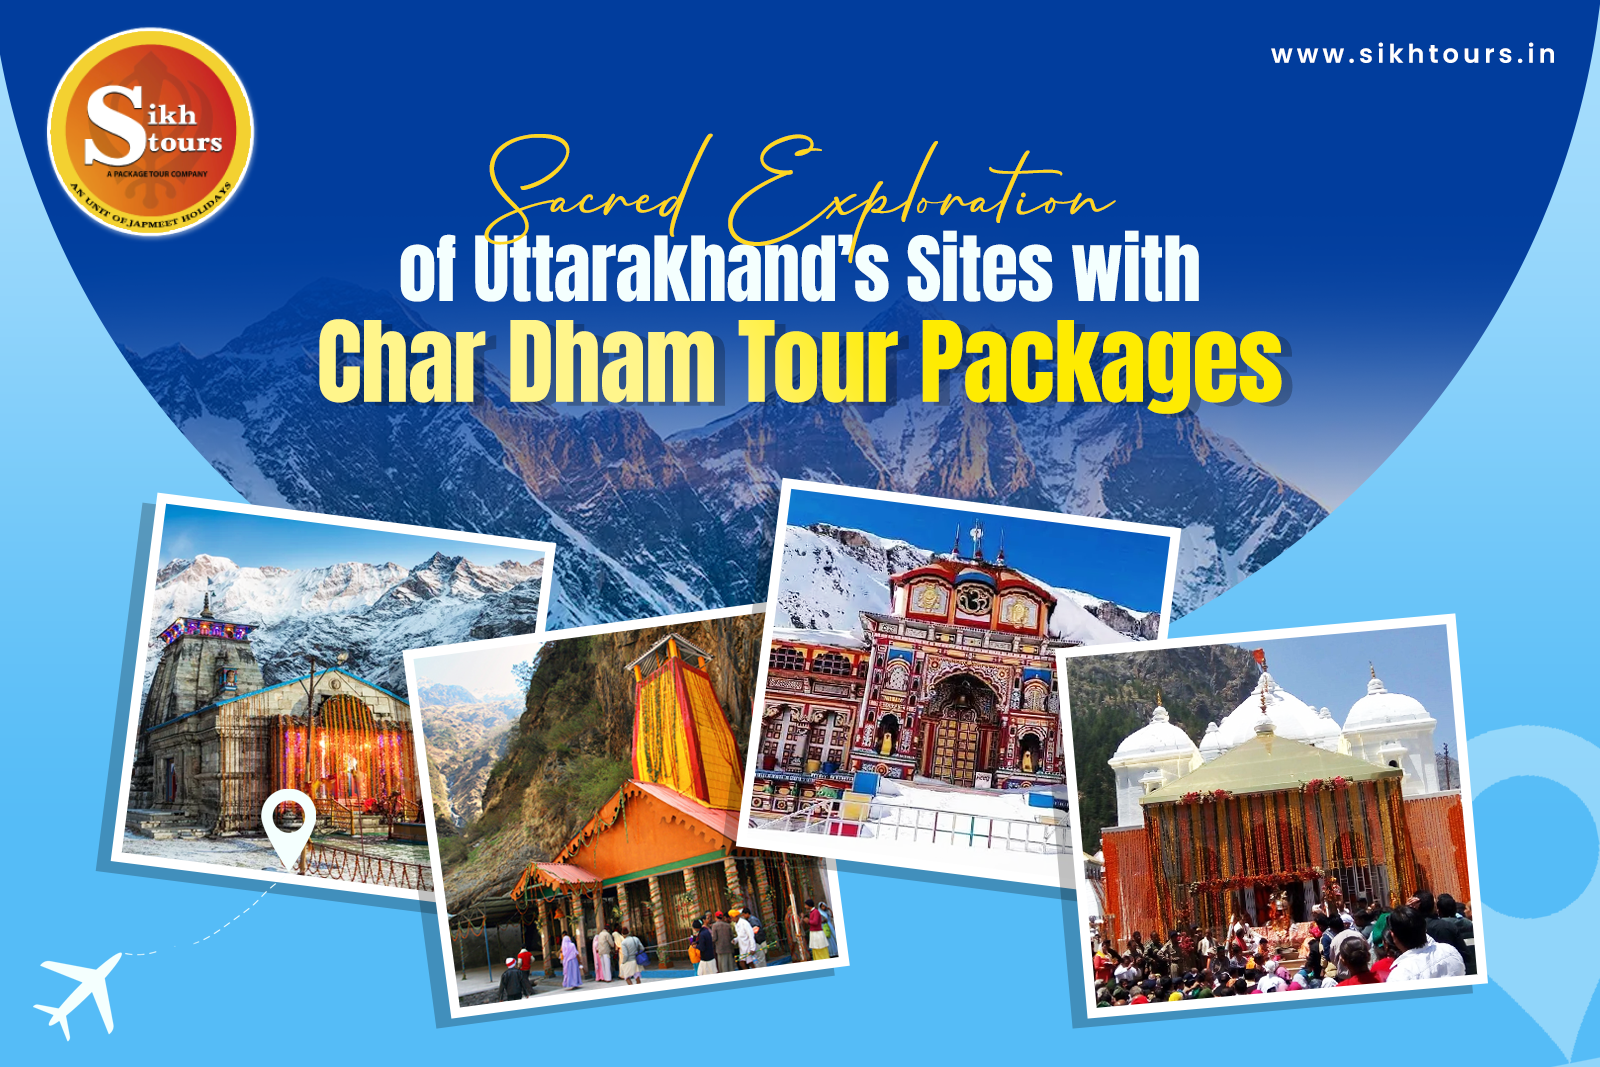 Sacred Exploration of Uttarakhand’s Sites with Char Dham Tour Packages